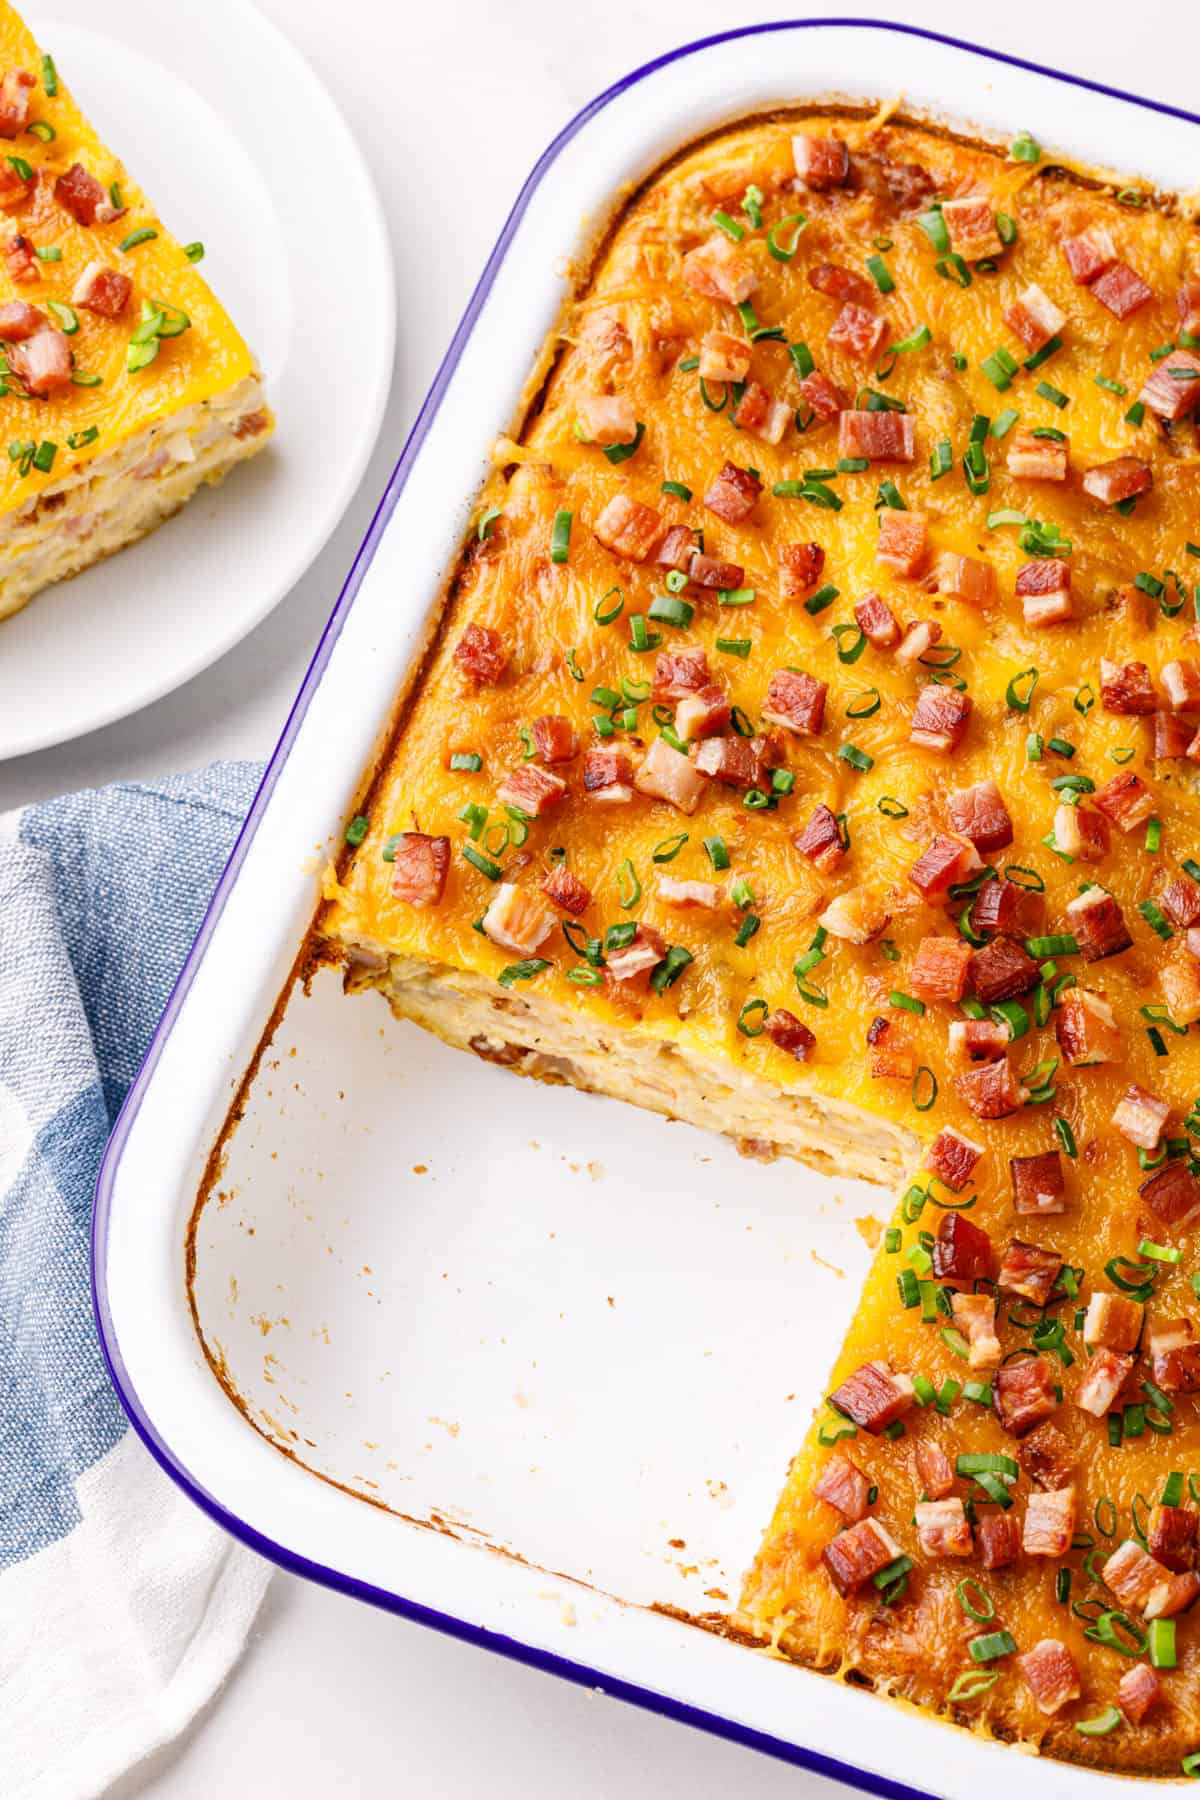 bisquick breakfast casserole made with bacon baked in a casserole dish with a serving taken out